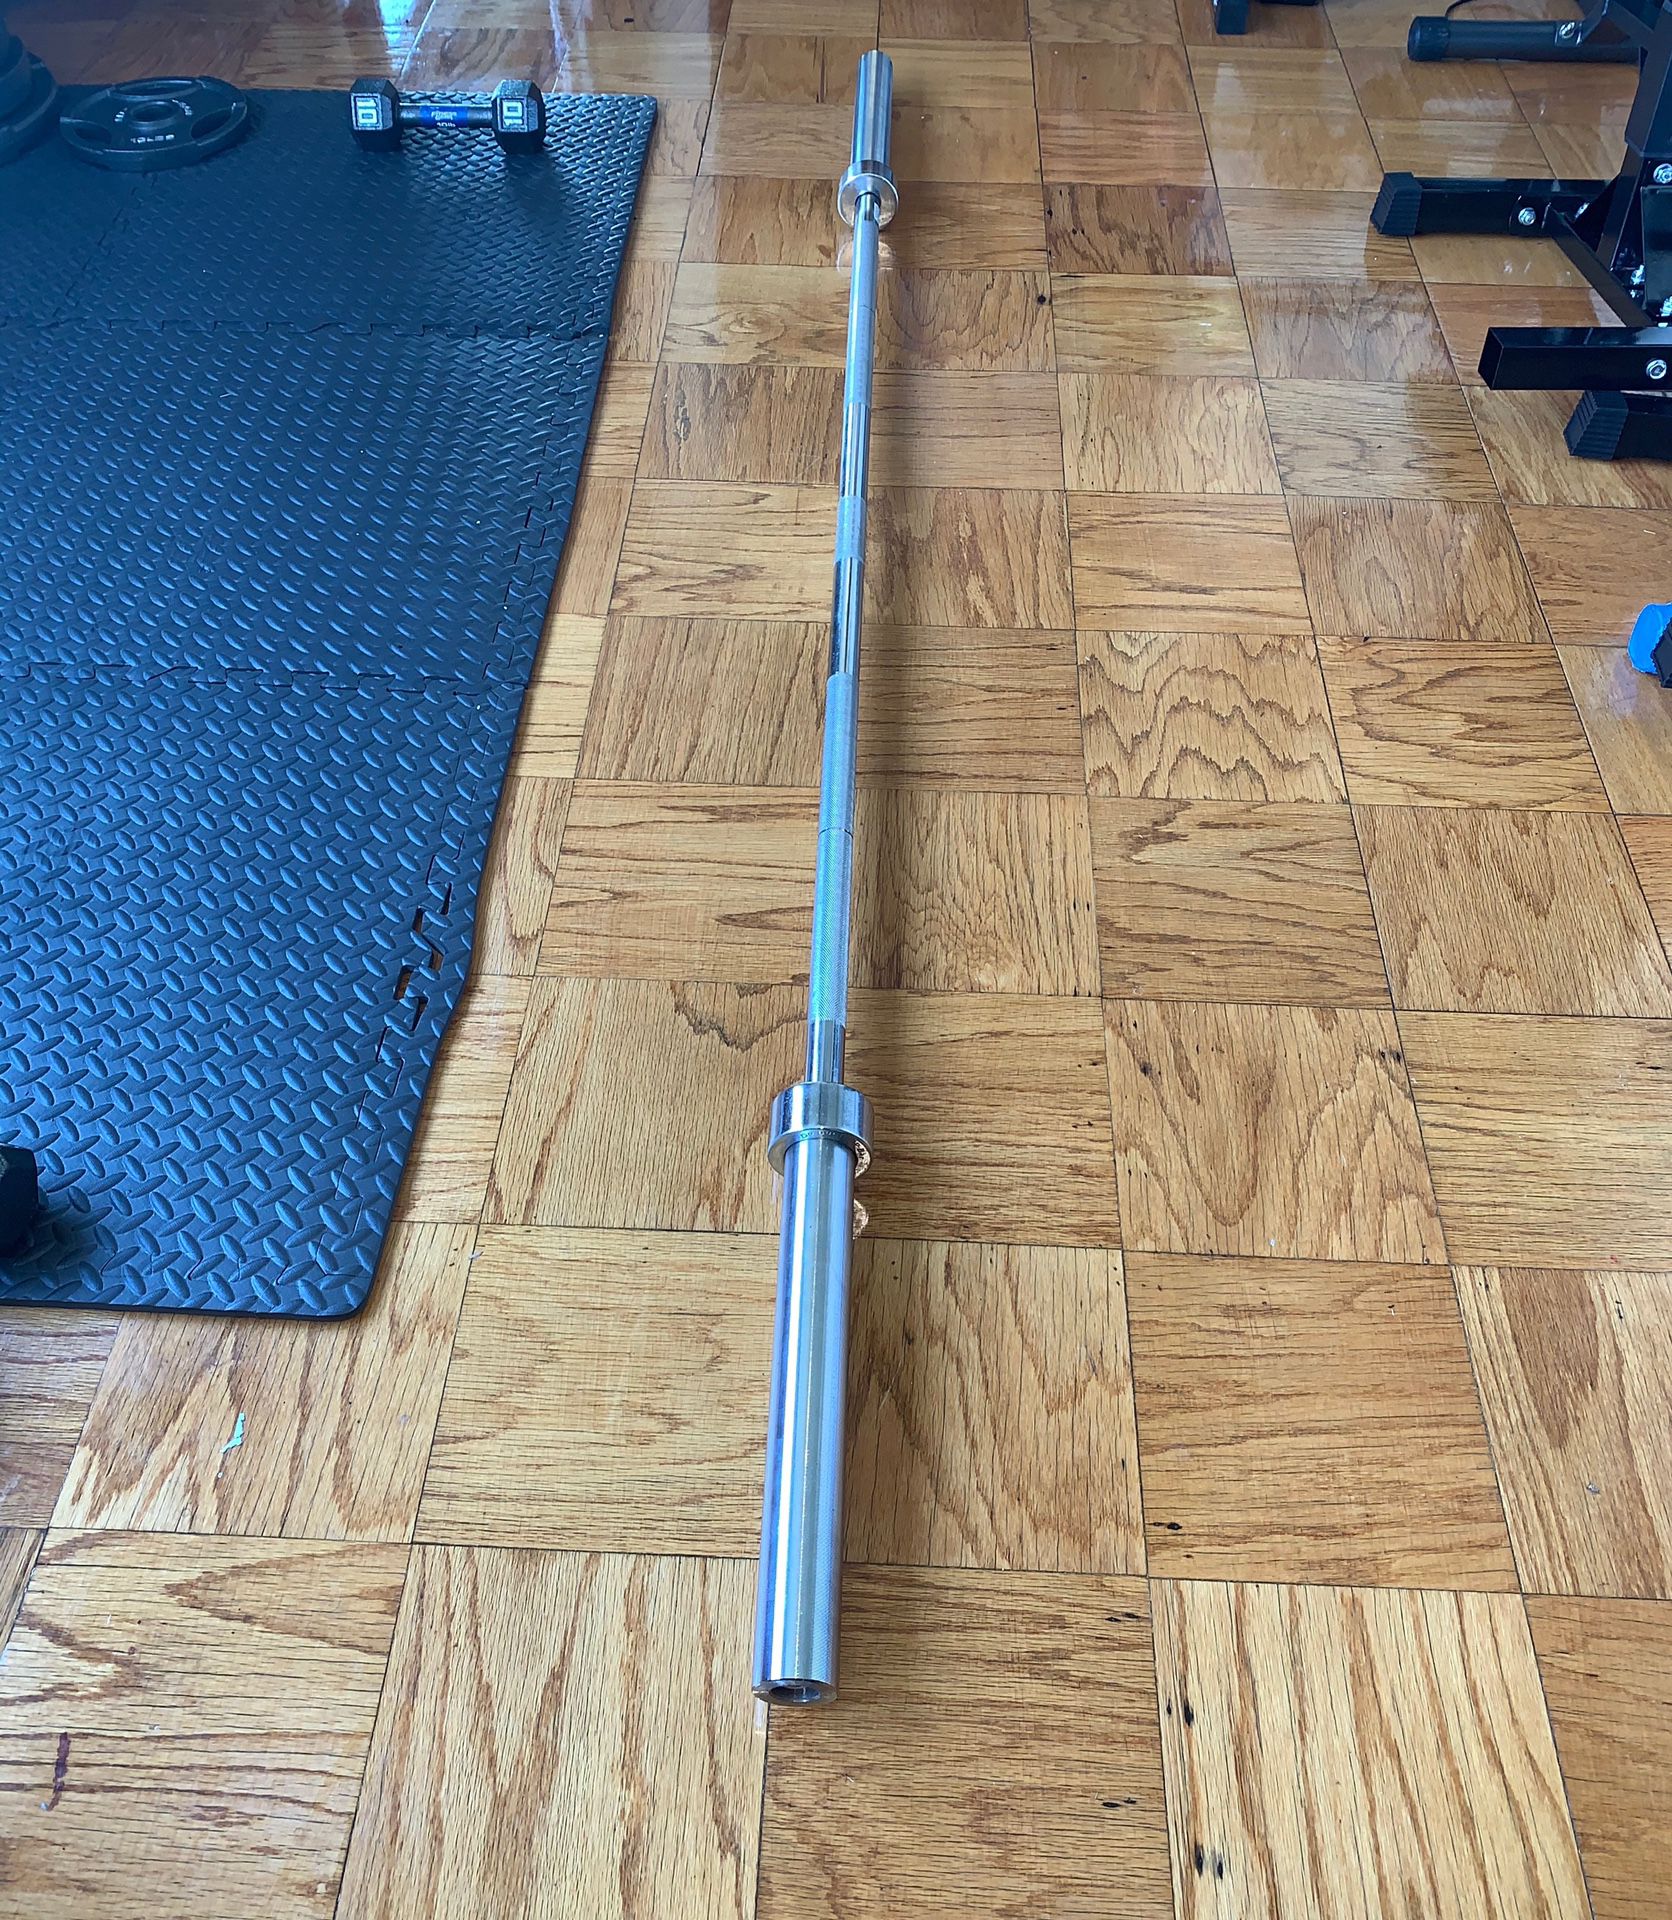 7ft 45lb Olympic Weight Bar (weights not included)